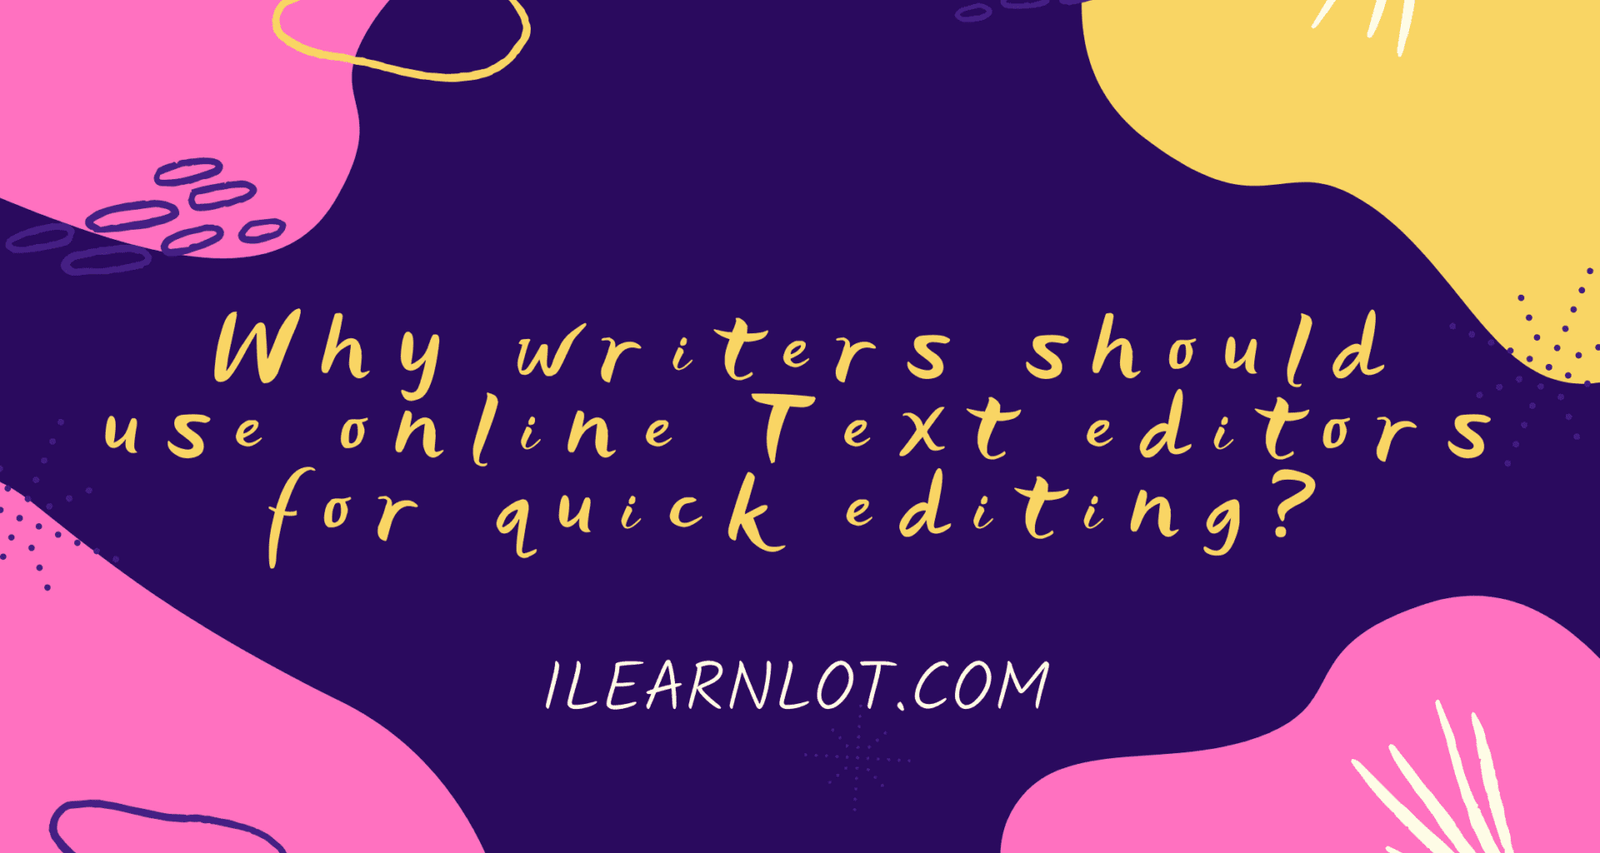 free-online-text-editor-with-fonts-why-writers-should-use-ilearnlot